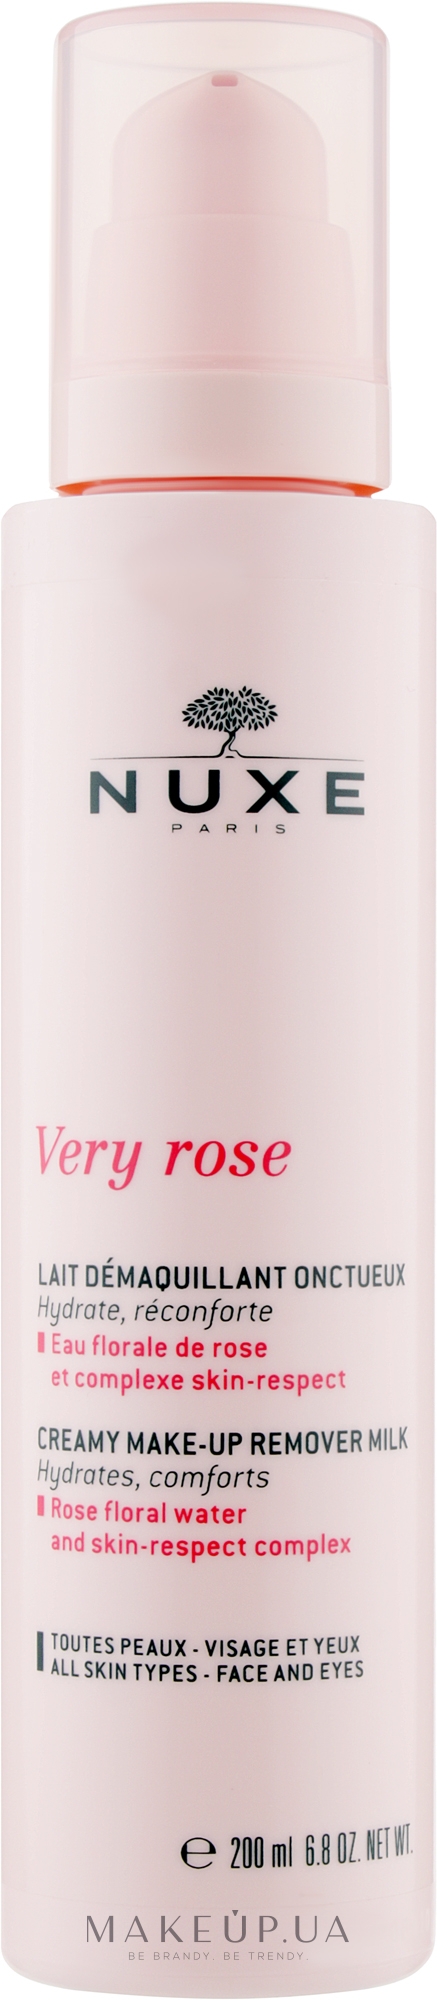 Nuxe Very Rose Creamy Make-up Remover Milk - Nuxe Very Rose Creamy Make-up Remover Milk — фото 200ml